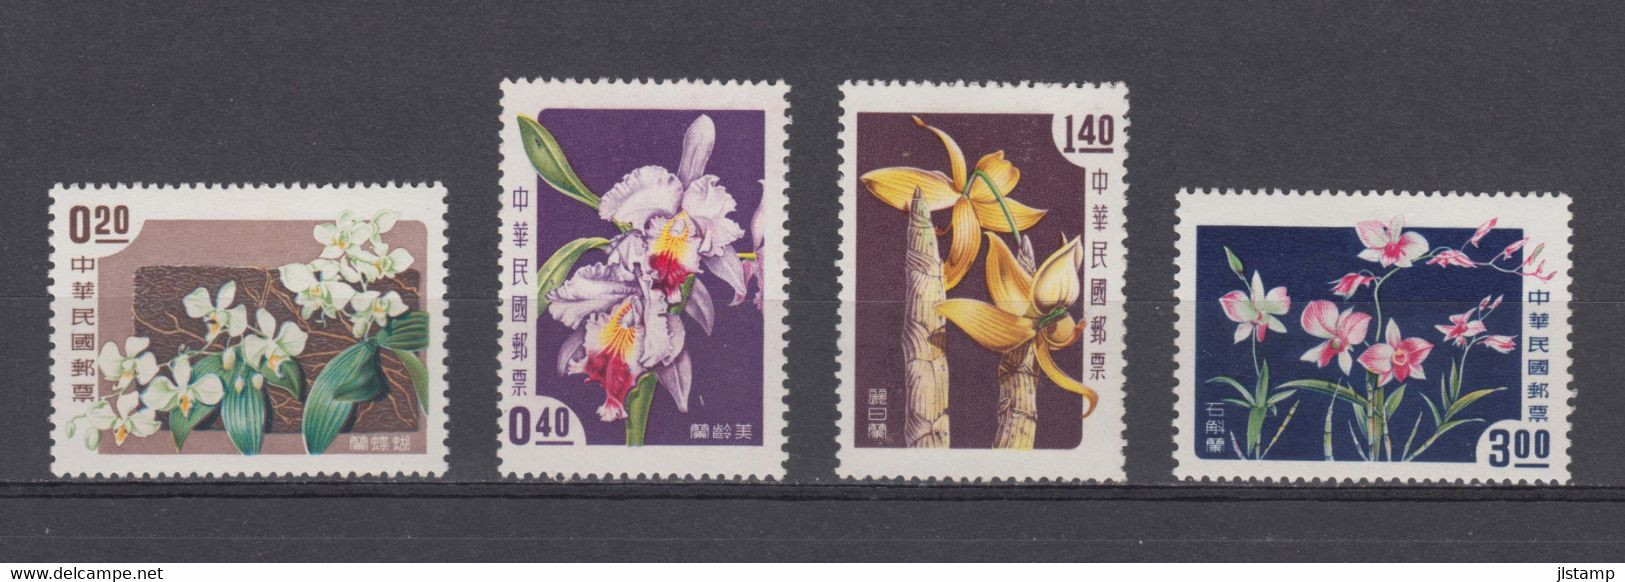 China Taiwan 1958 Orchids Flowes Stamp Set,Scott# 1189-1192, MH,OG,VF - Unused Stamps